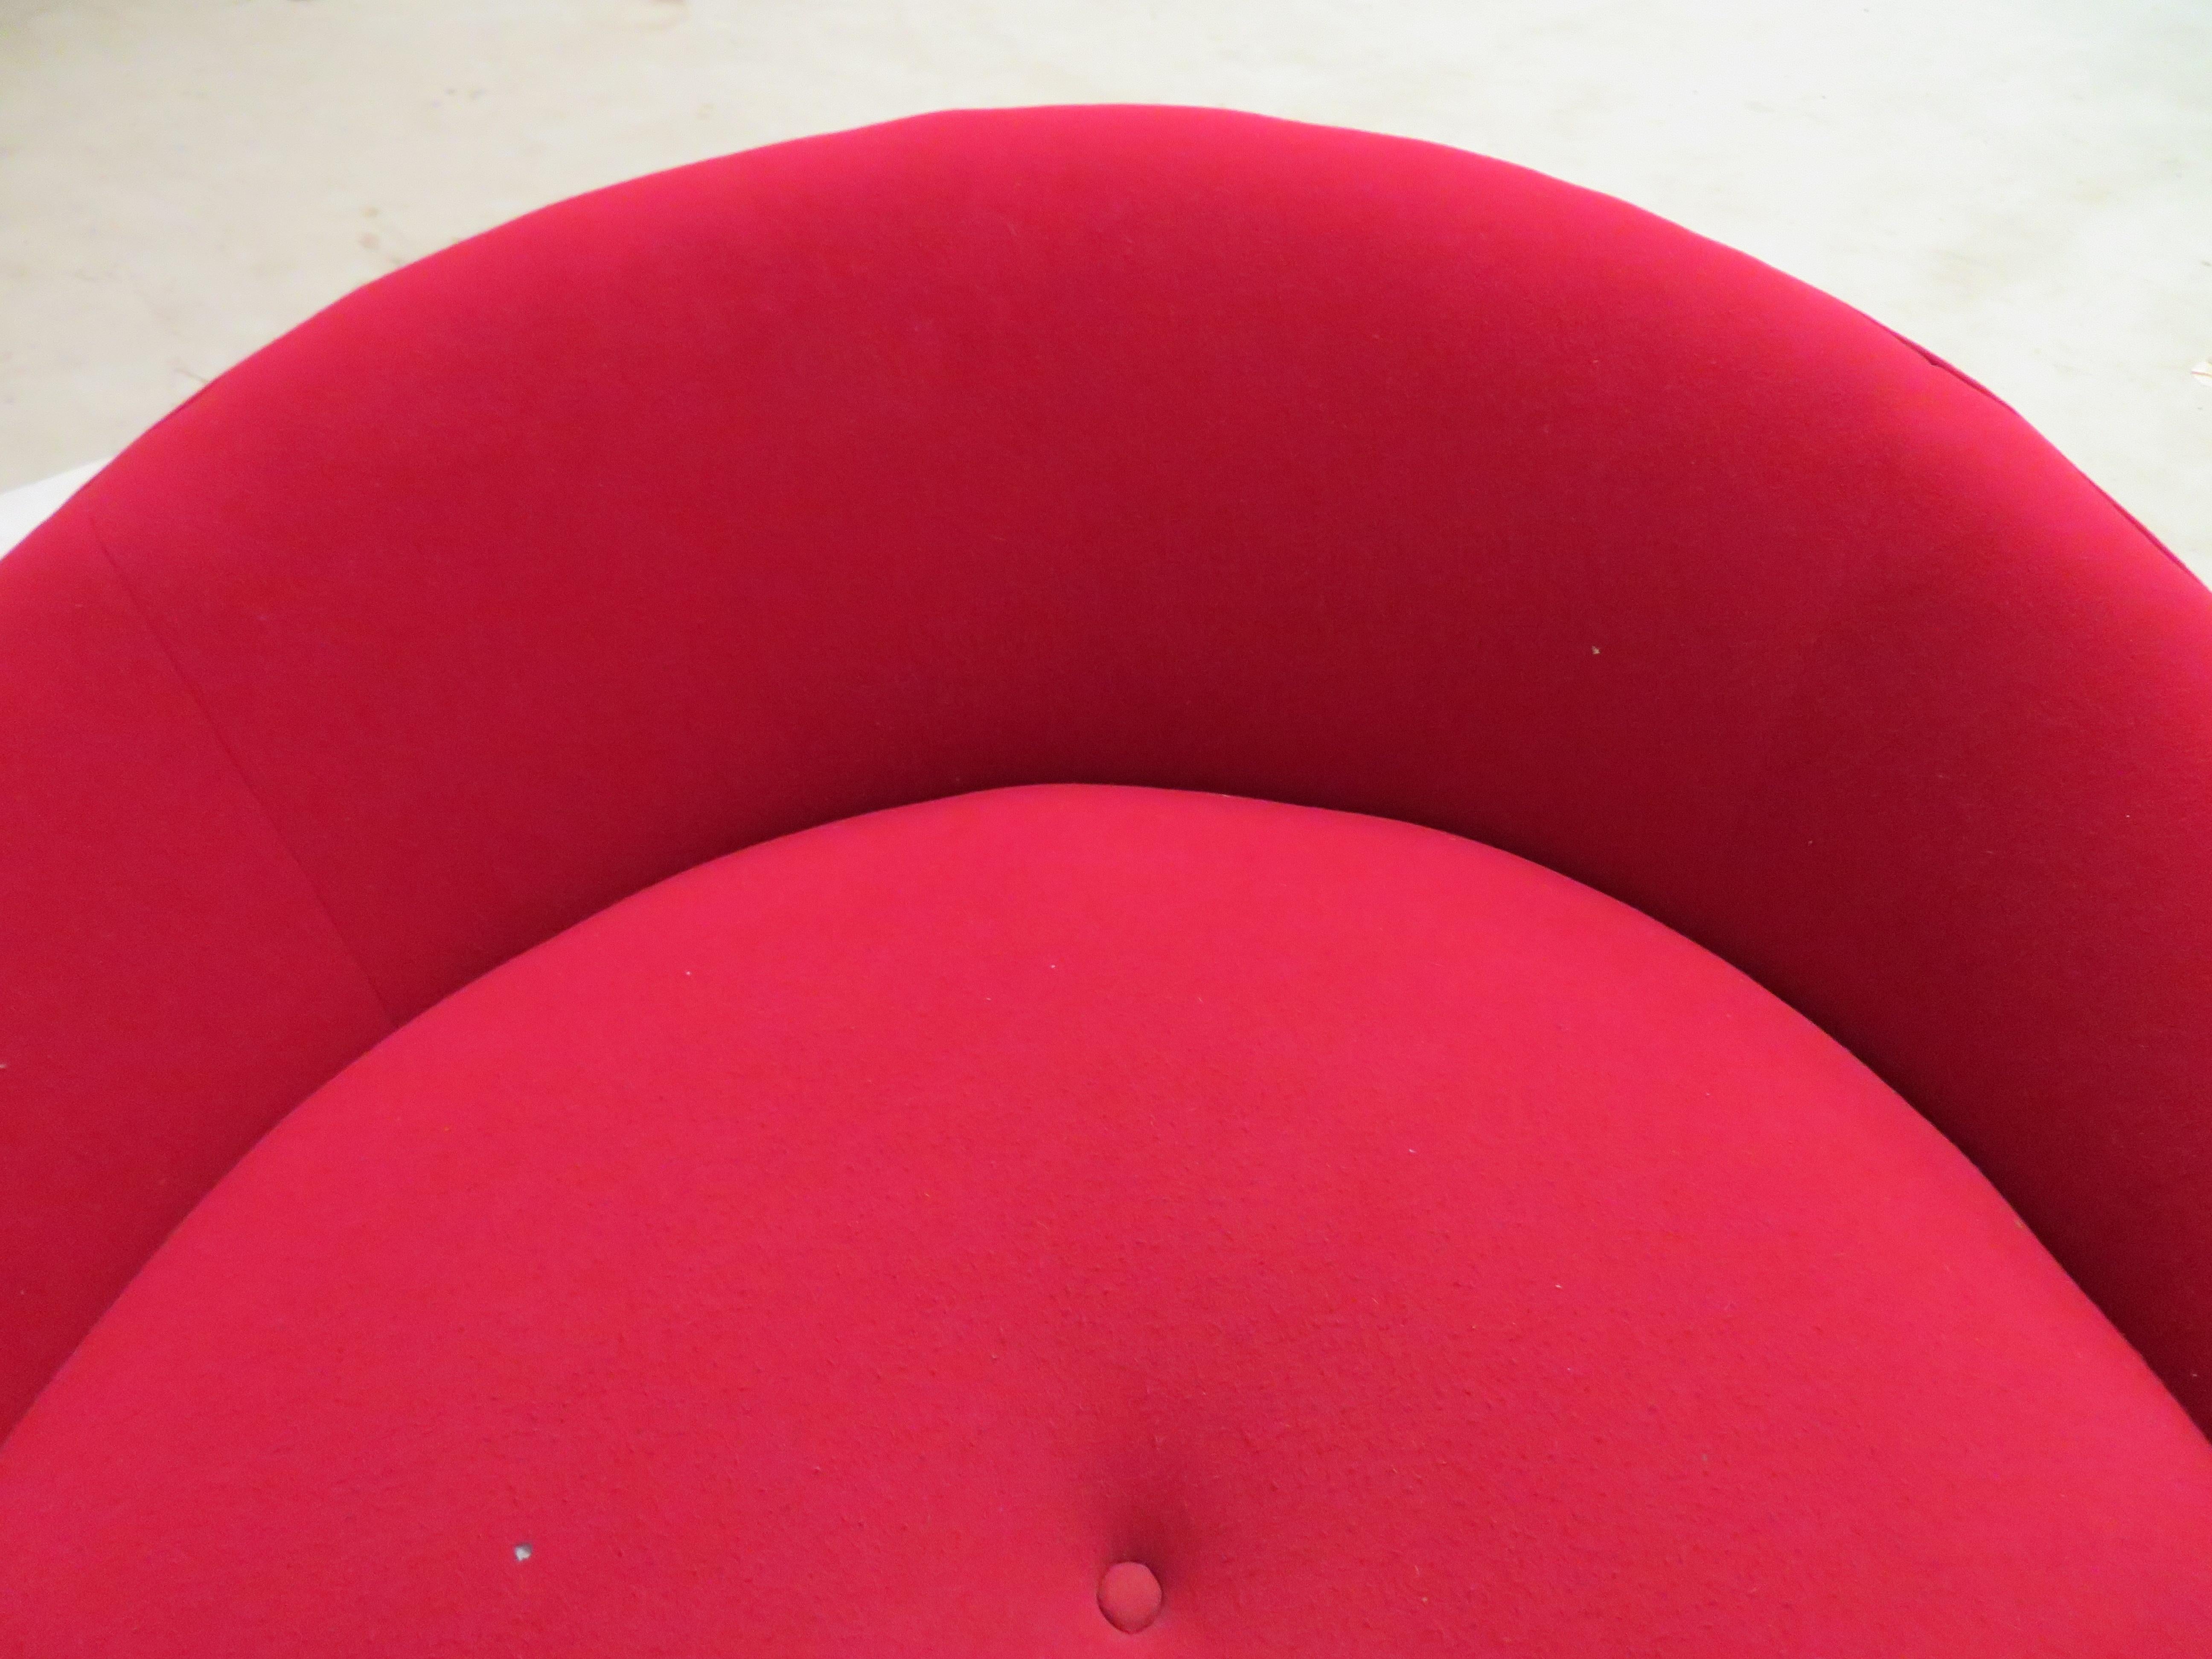 Milo Baughman Style Round Circular Chaise Lounge Chair, Mid-Century Modern In Good Condition For Sale In Pemberton, NJ